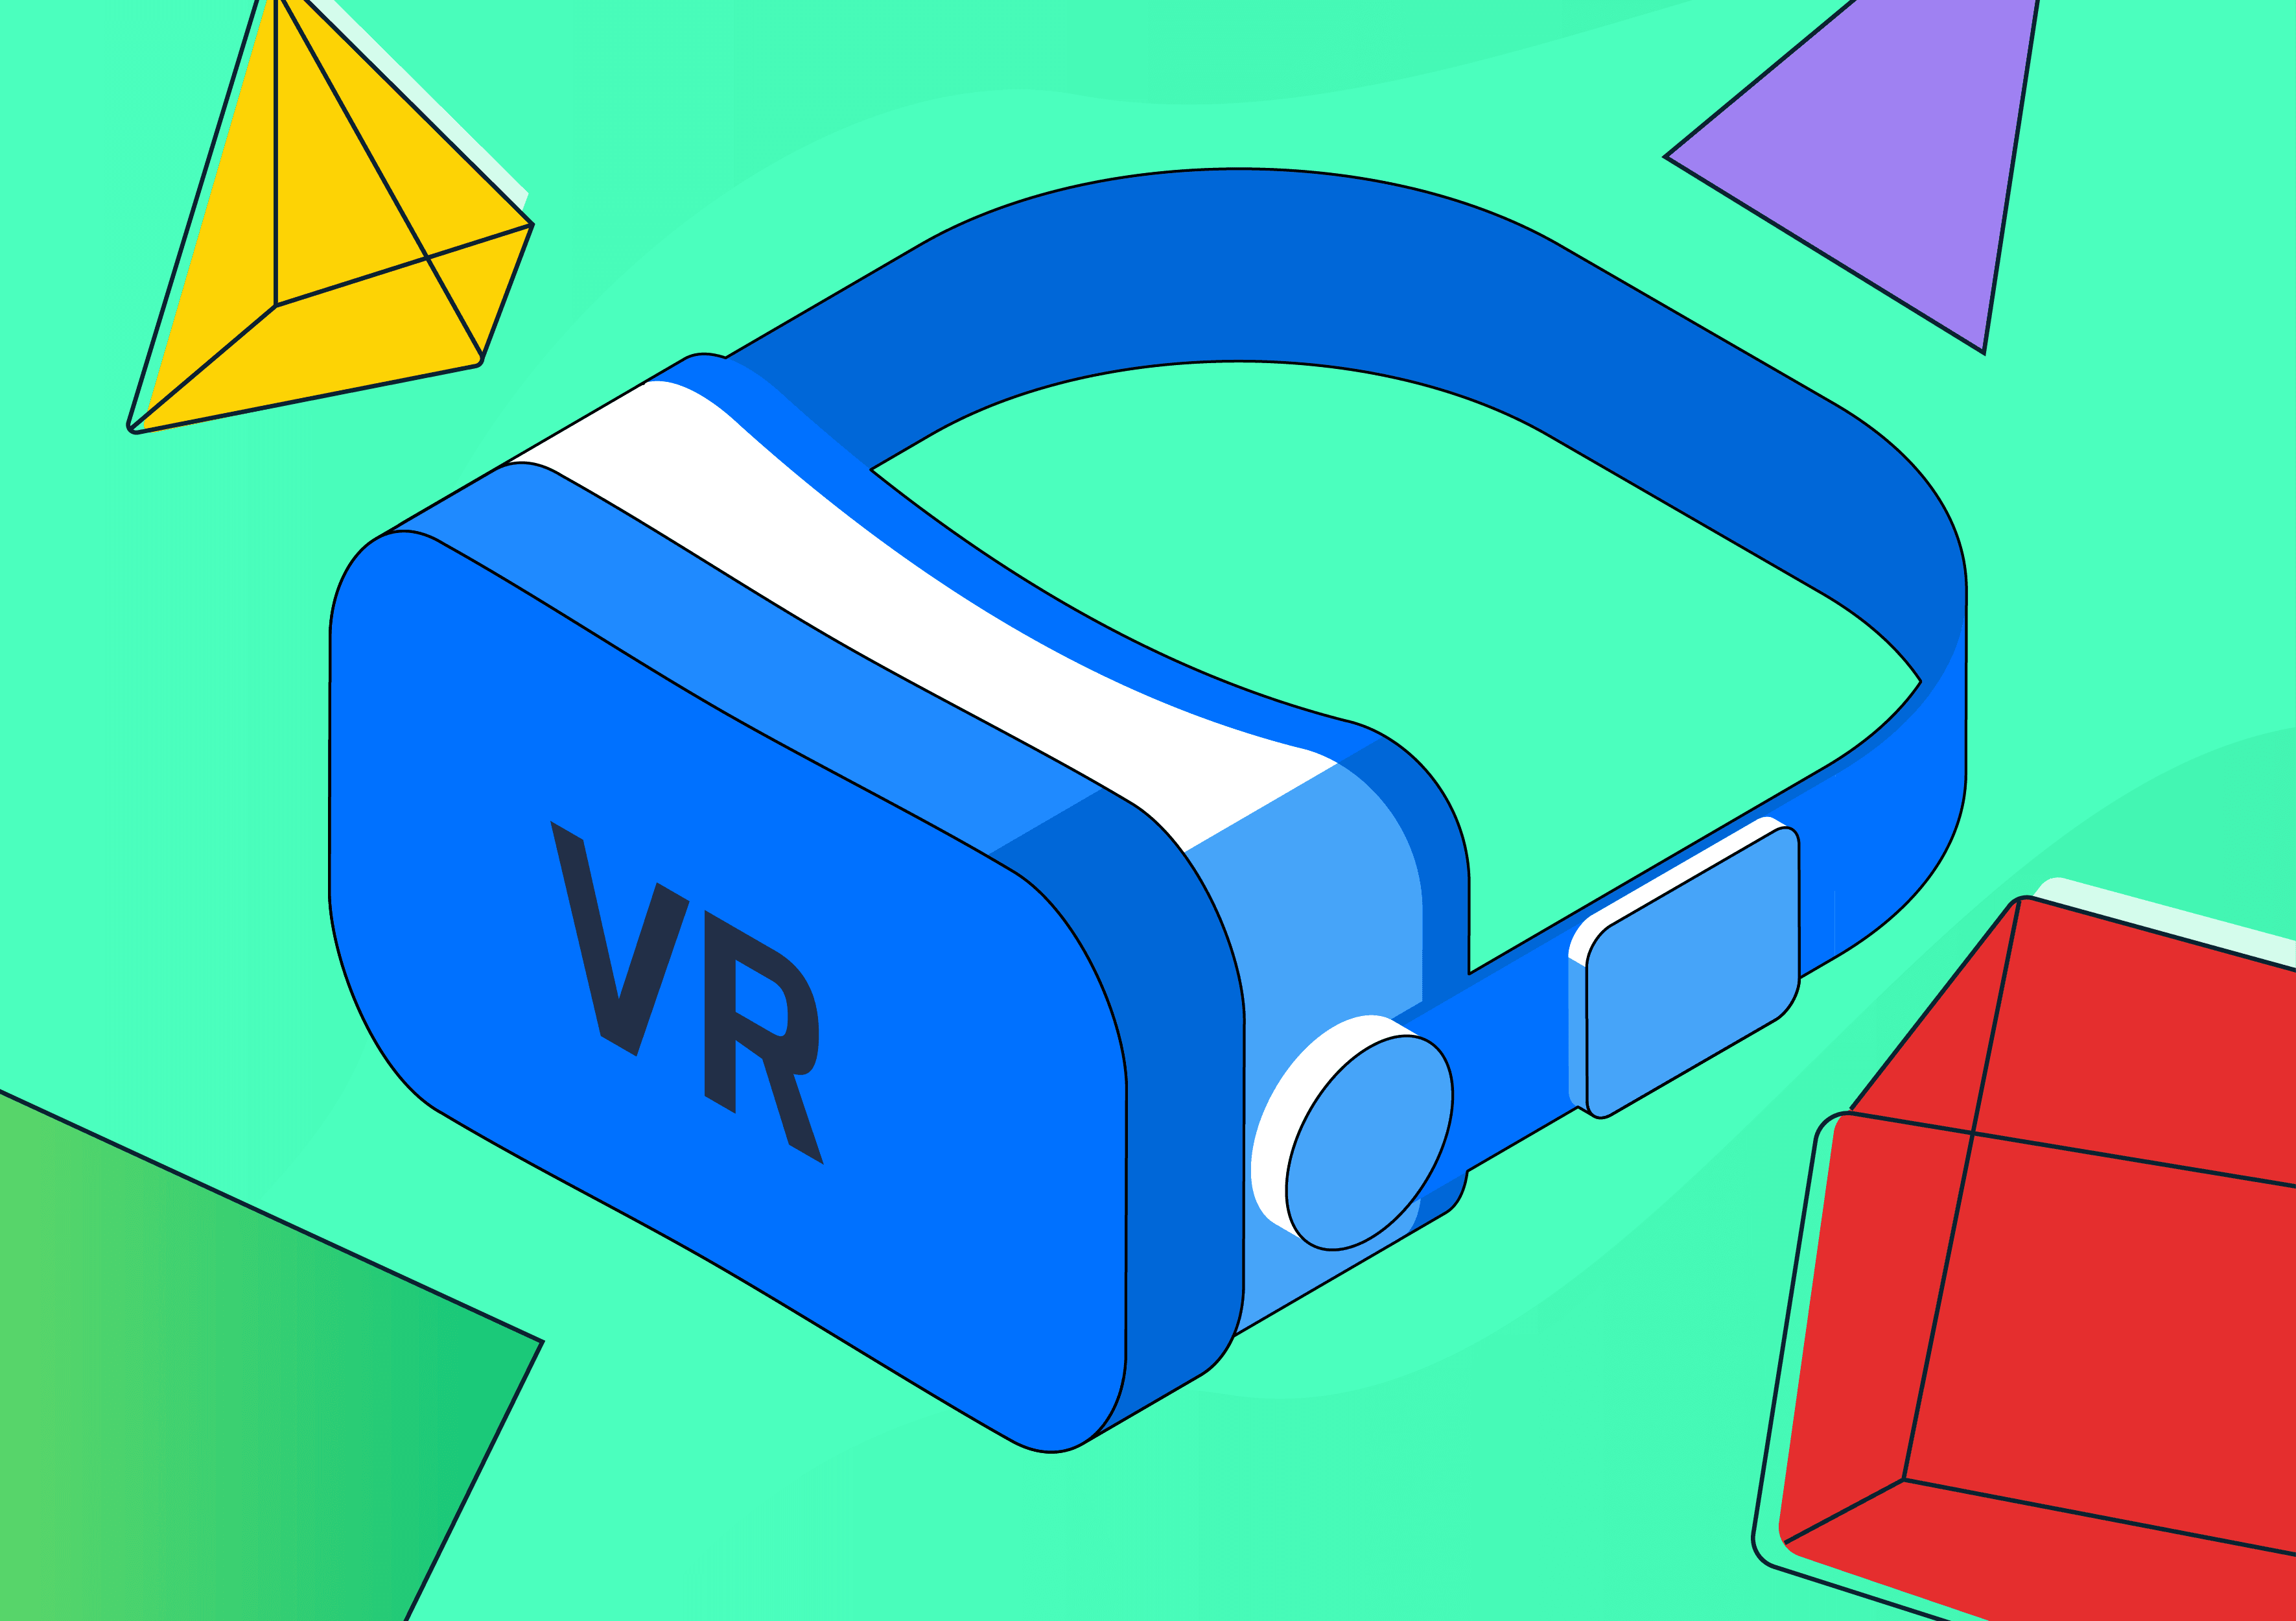 vr business opportunities in travel